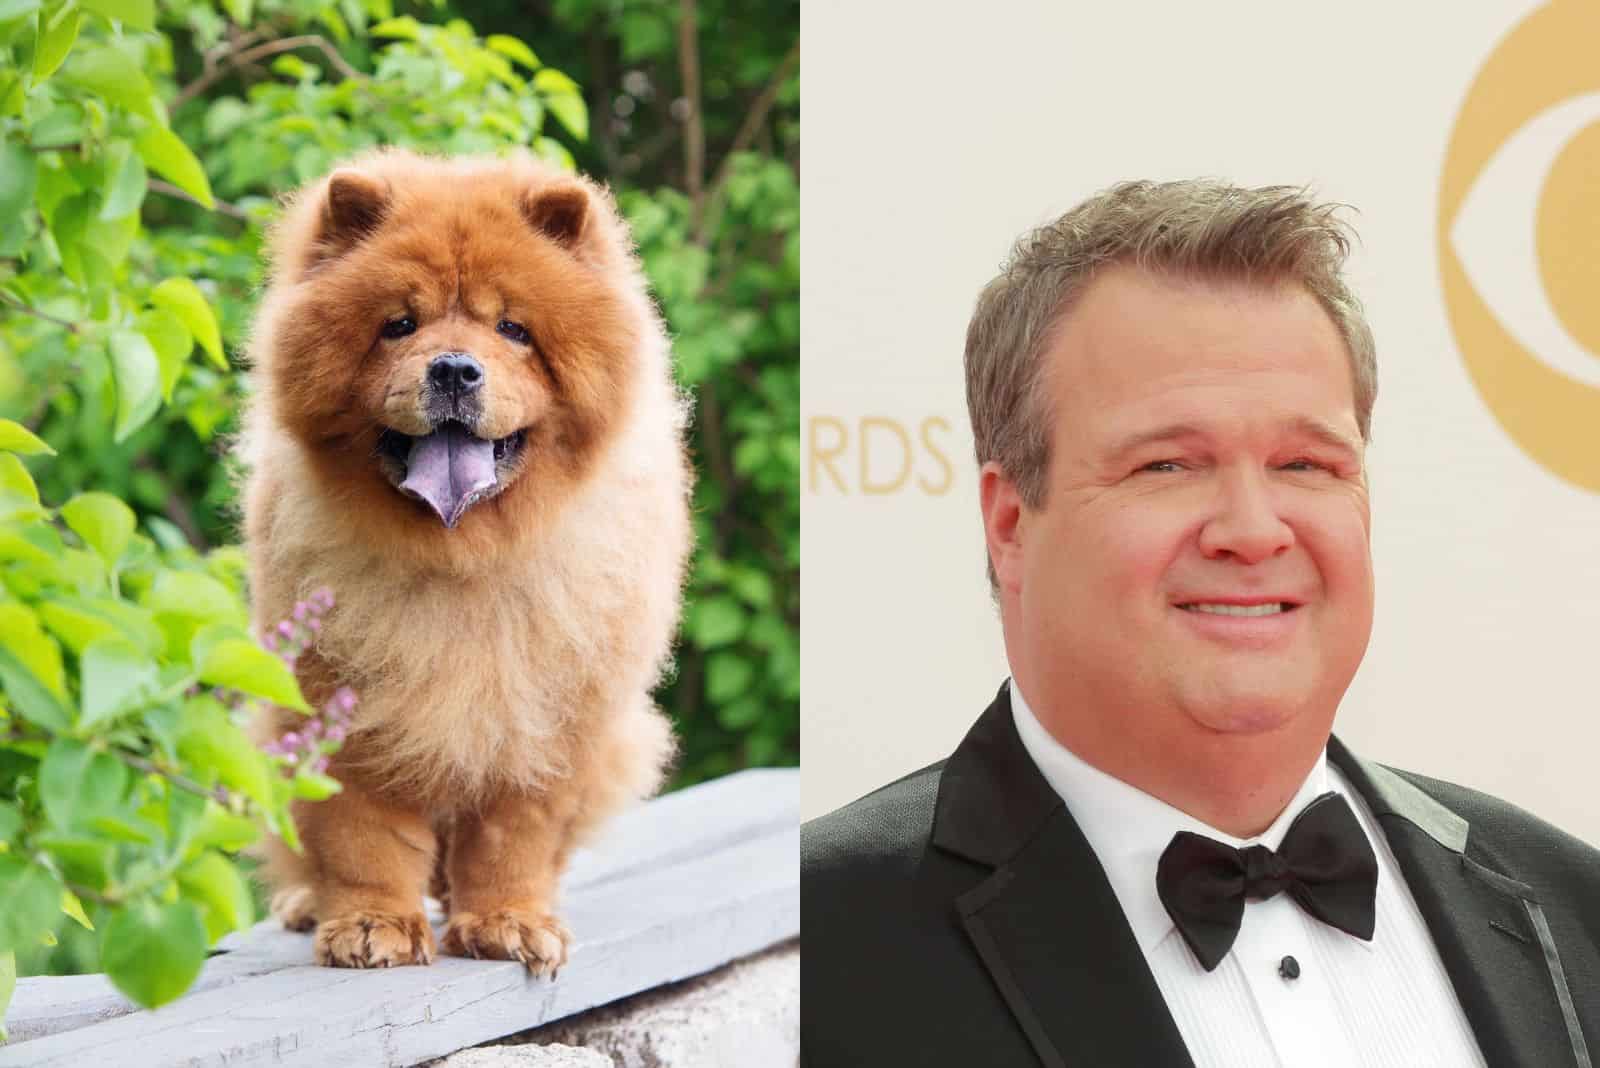 27 Hilarious Photos Of Dogs That Look Like Celebrities